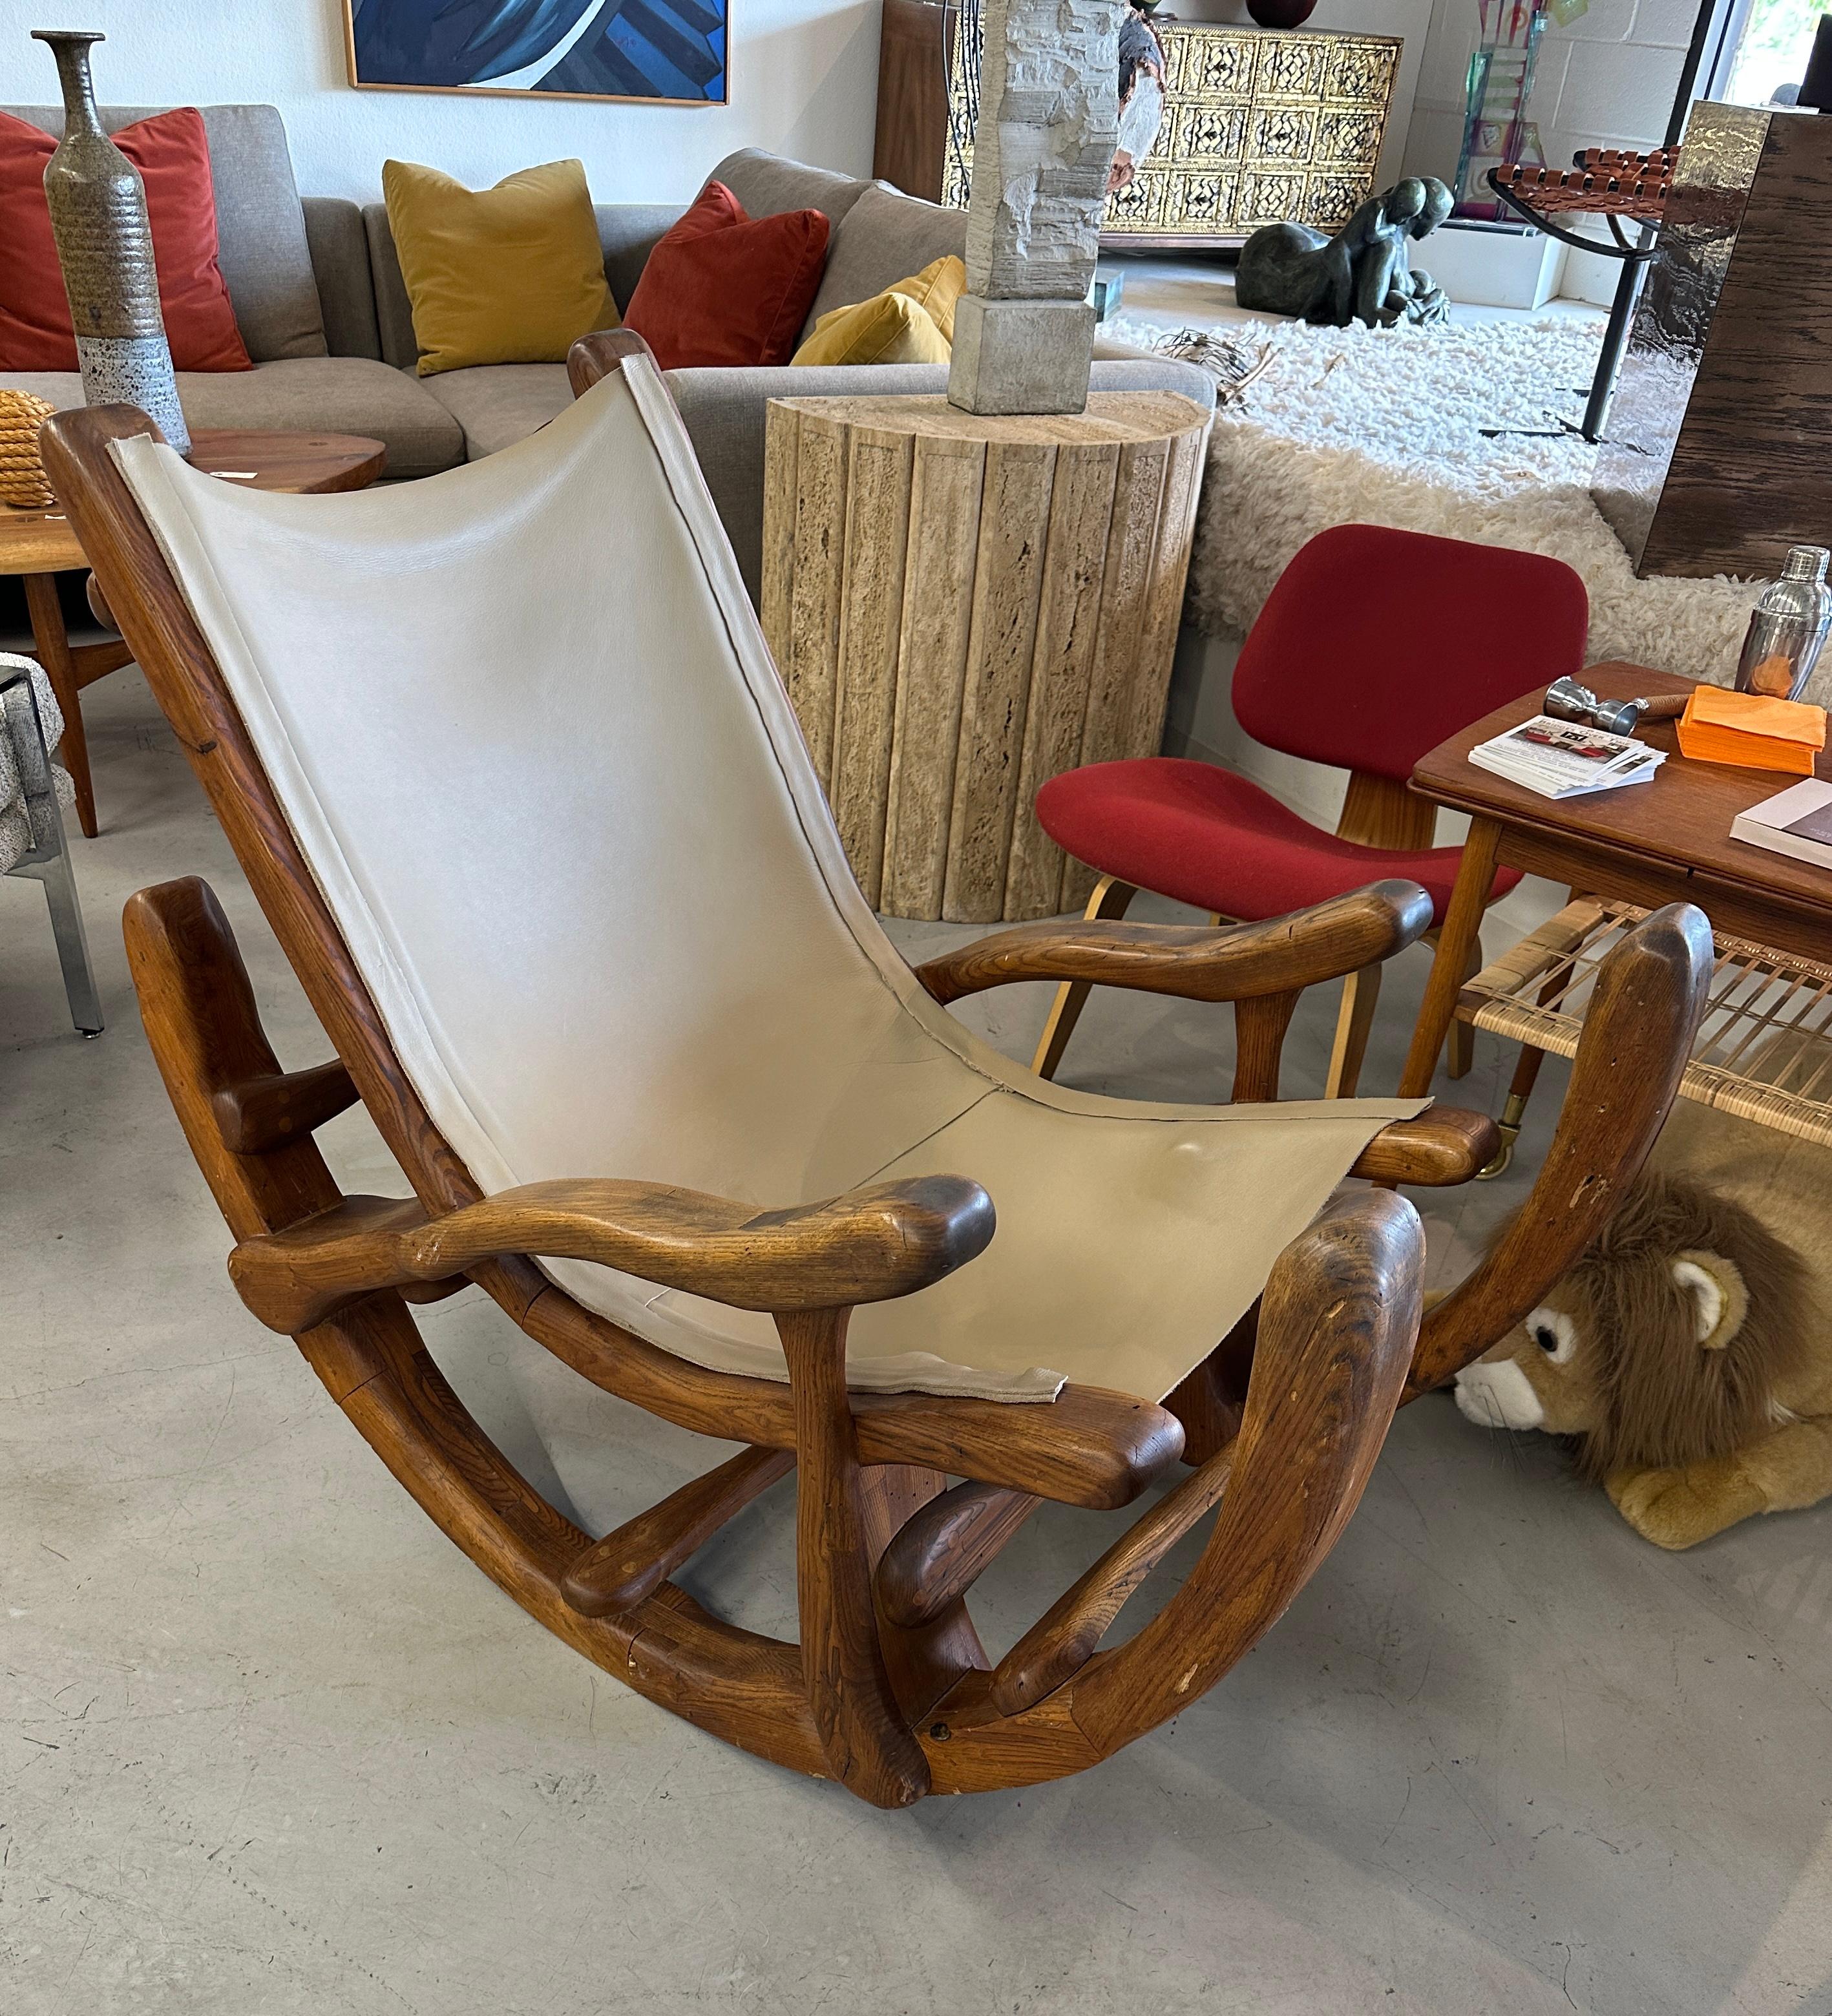 Hand-Crafted Michael Costerisan Rocking Chair, 1973 For Sale